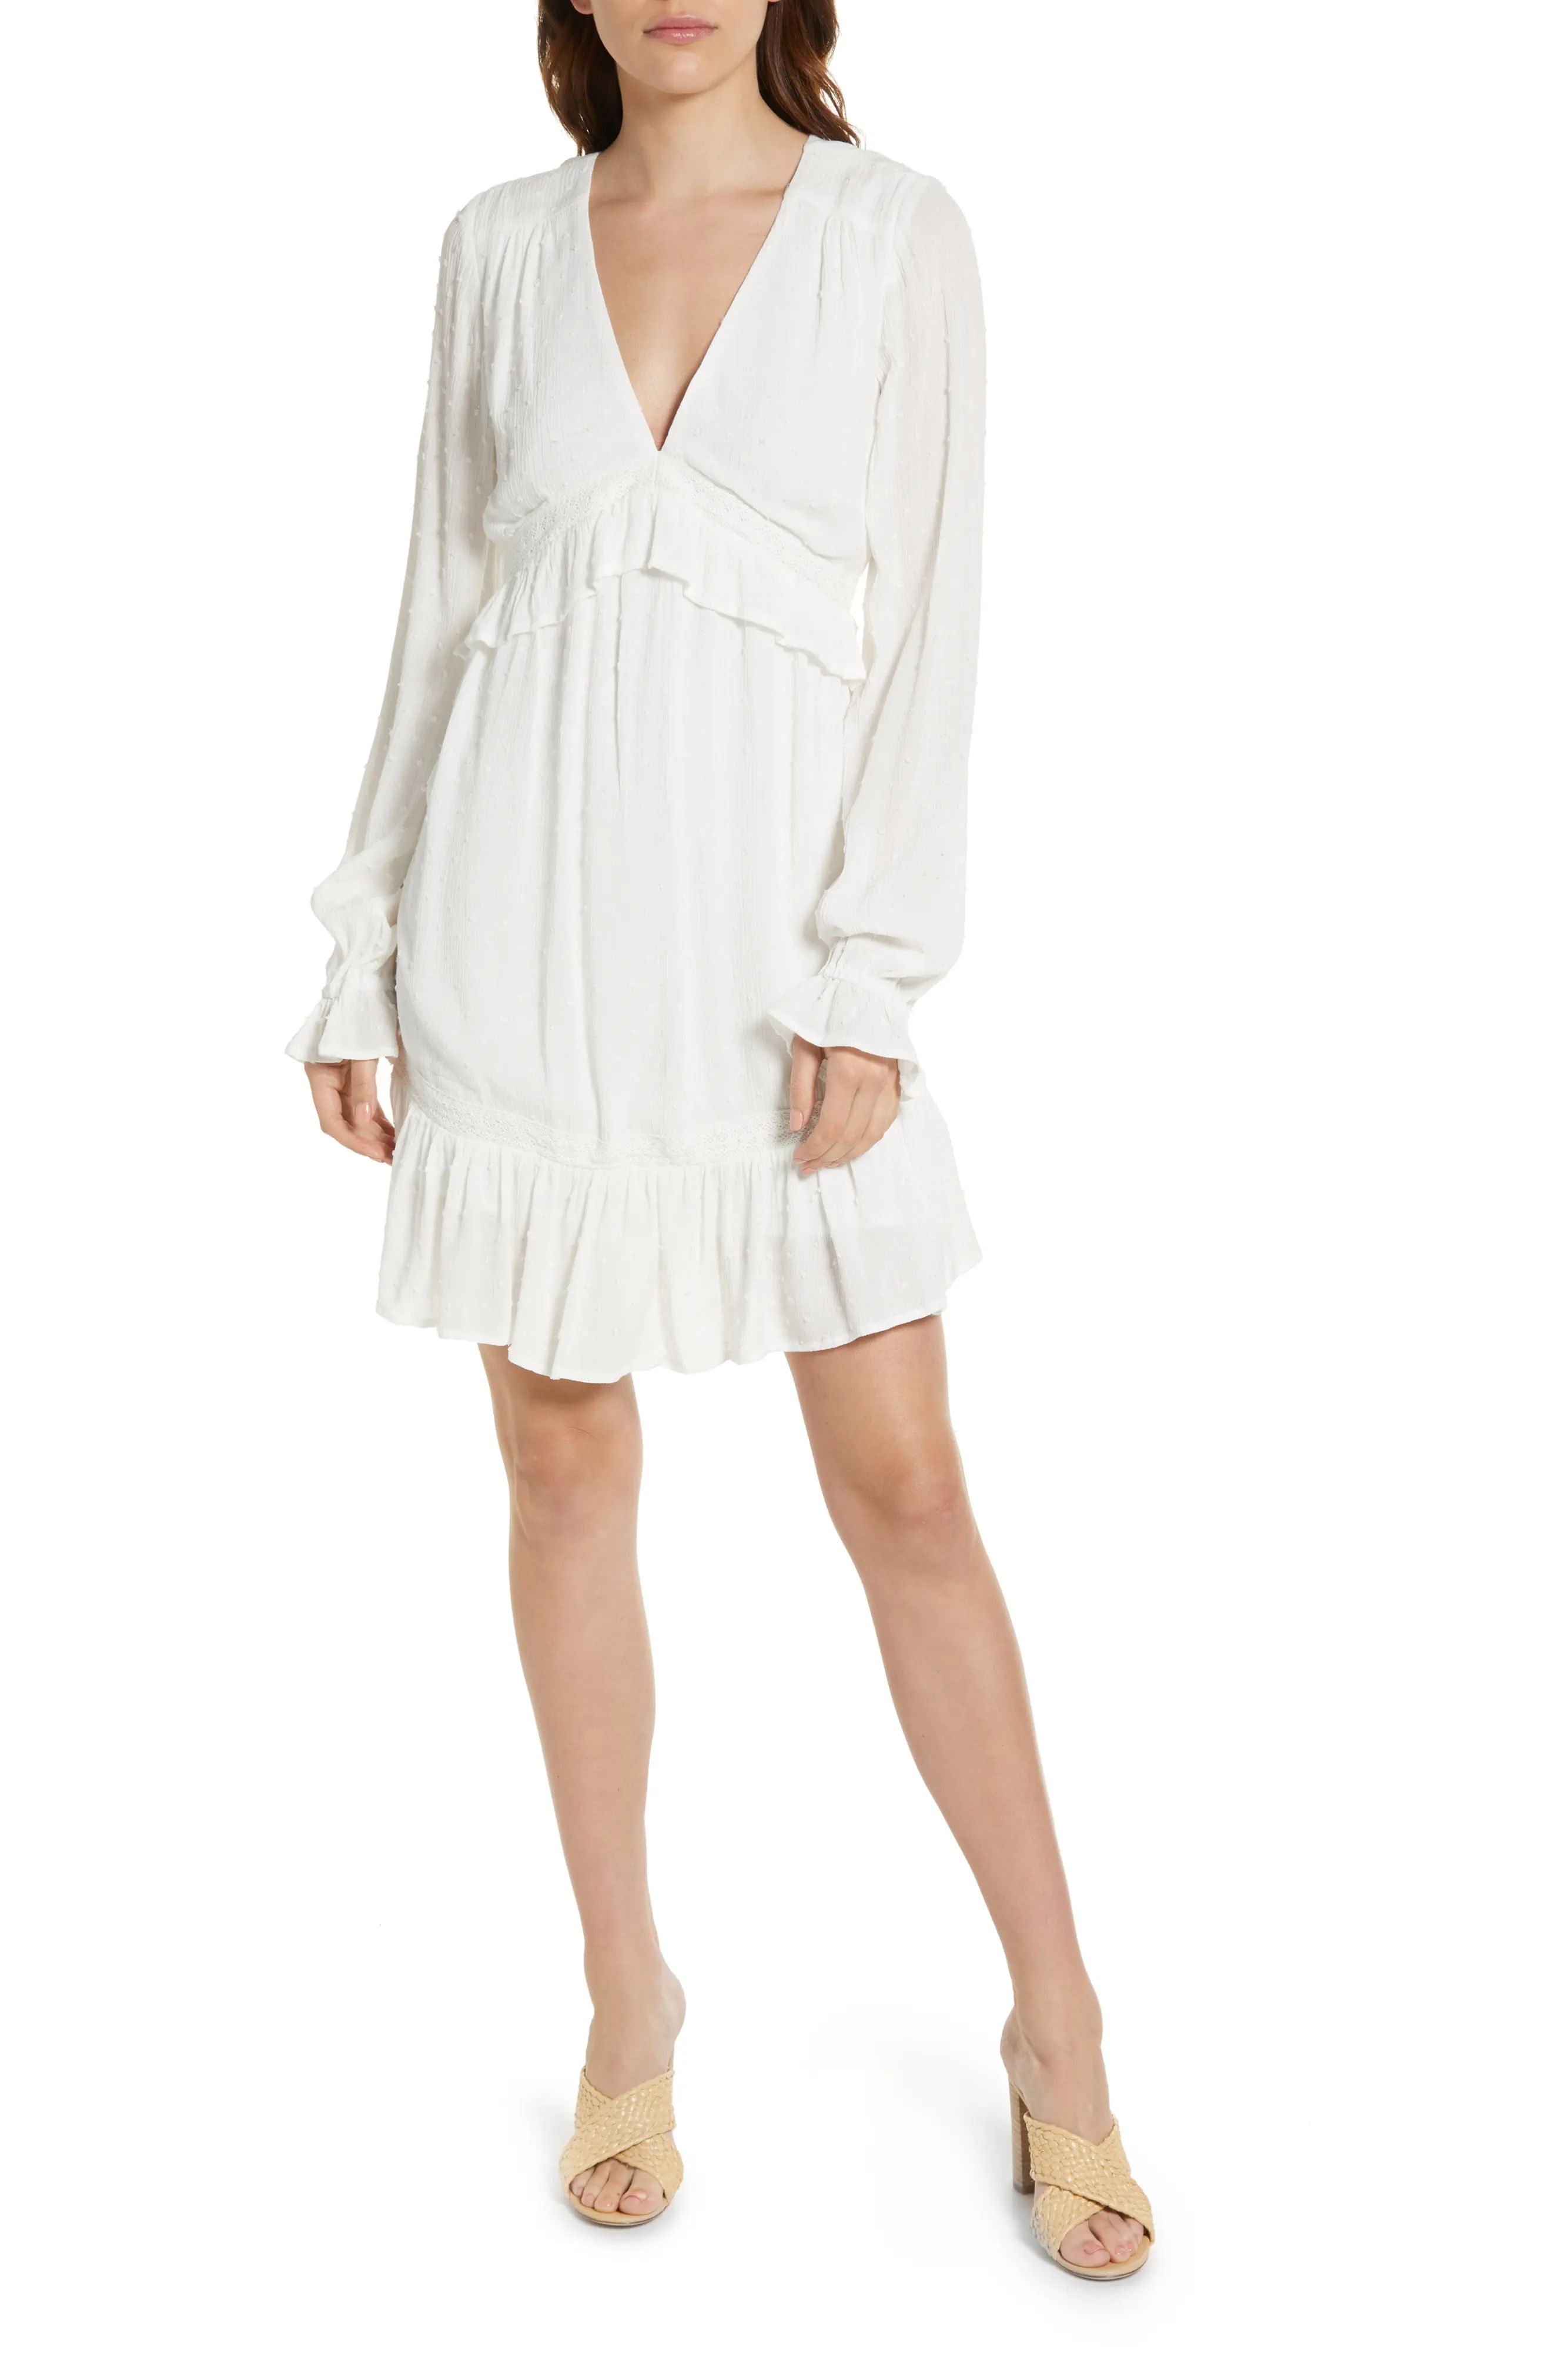 PAIGE Odelise Long Sleeve Dress in White at Nordstrom, Size Small | Nordstrom